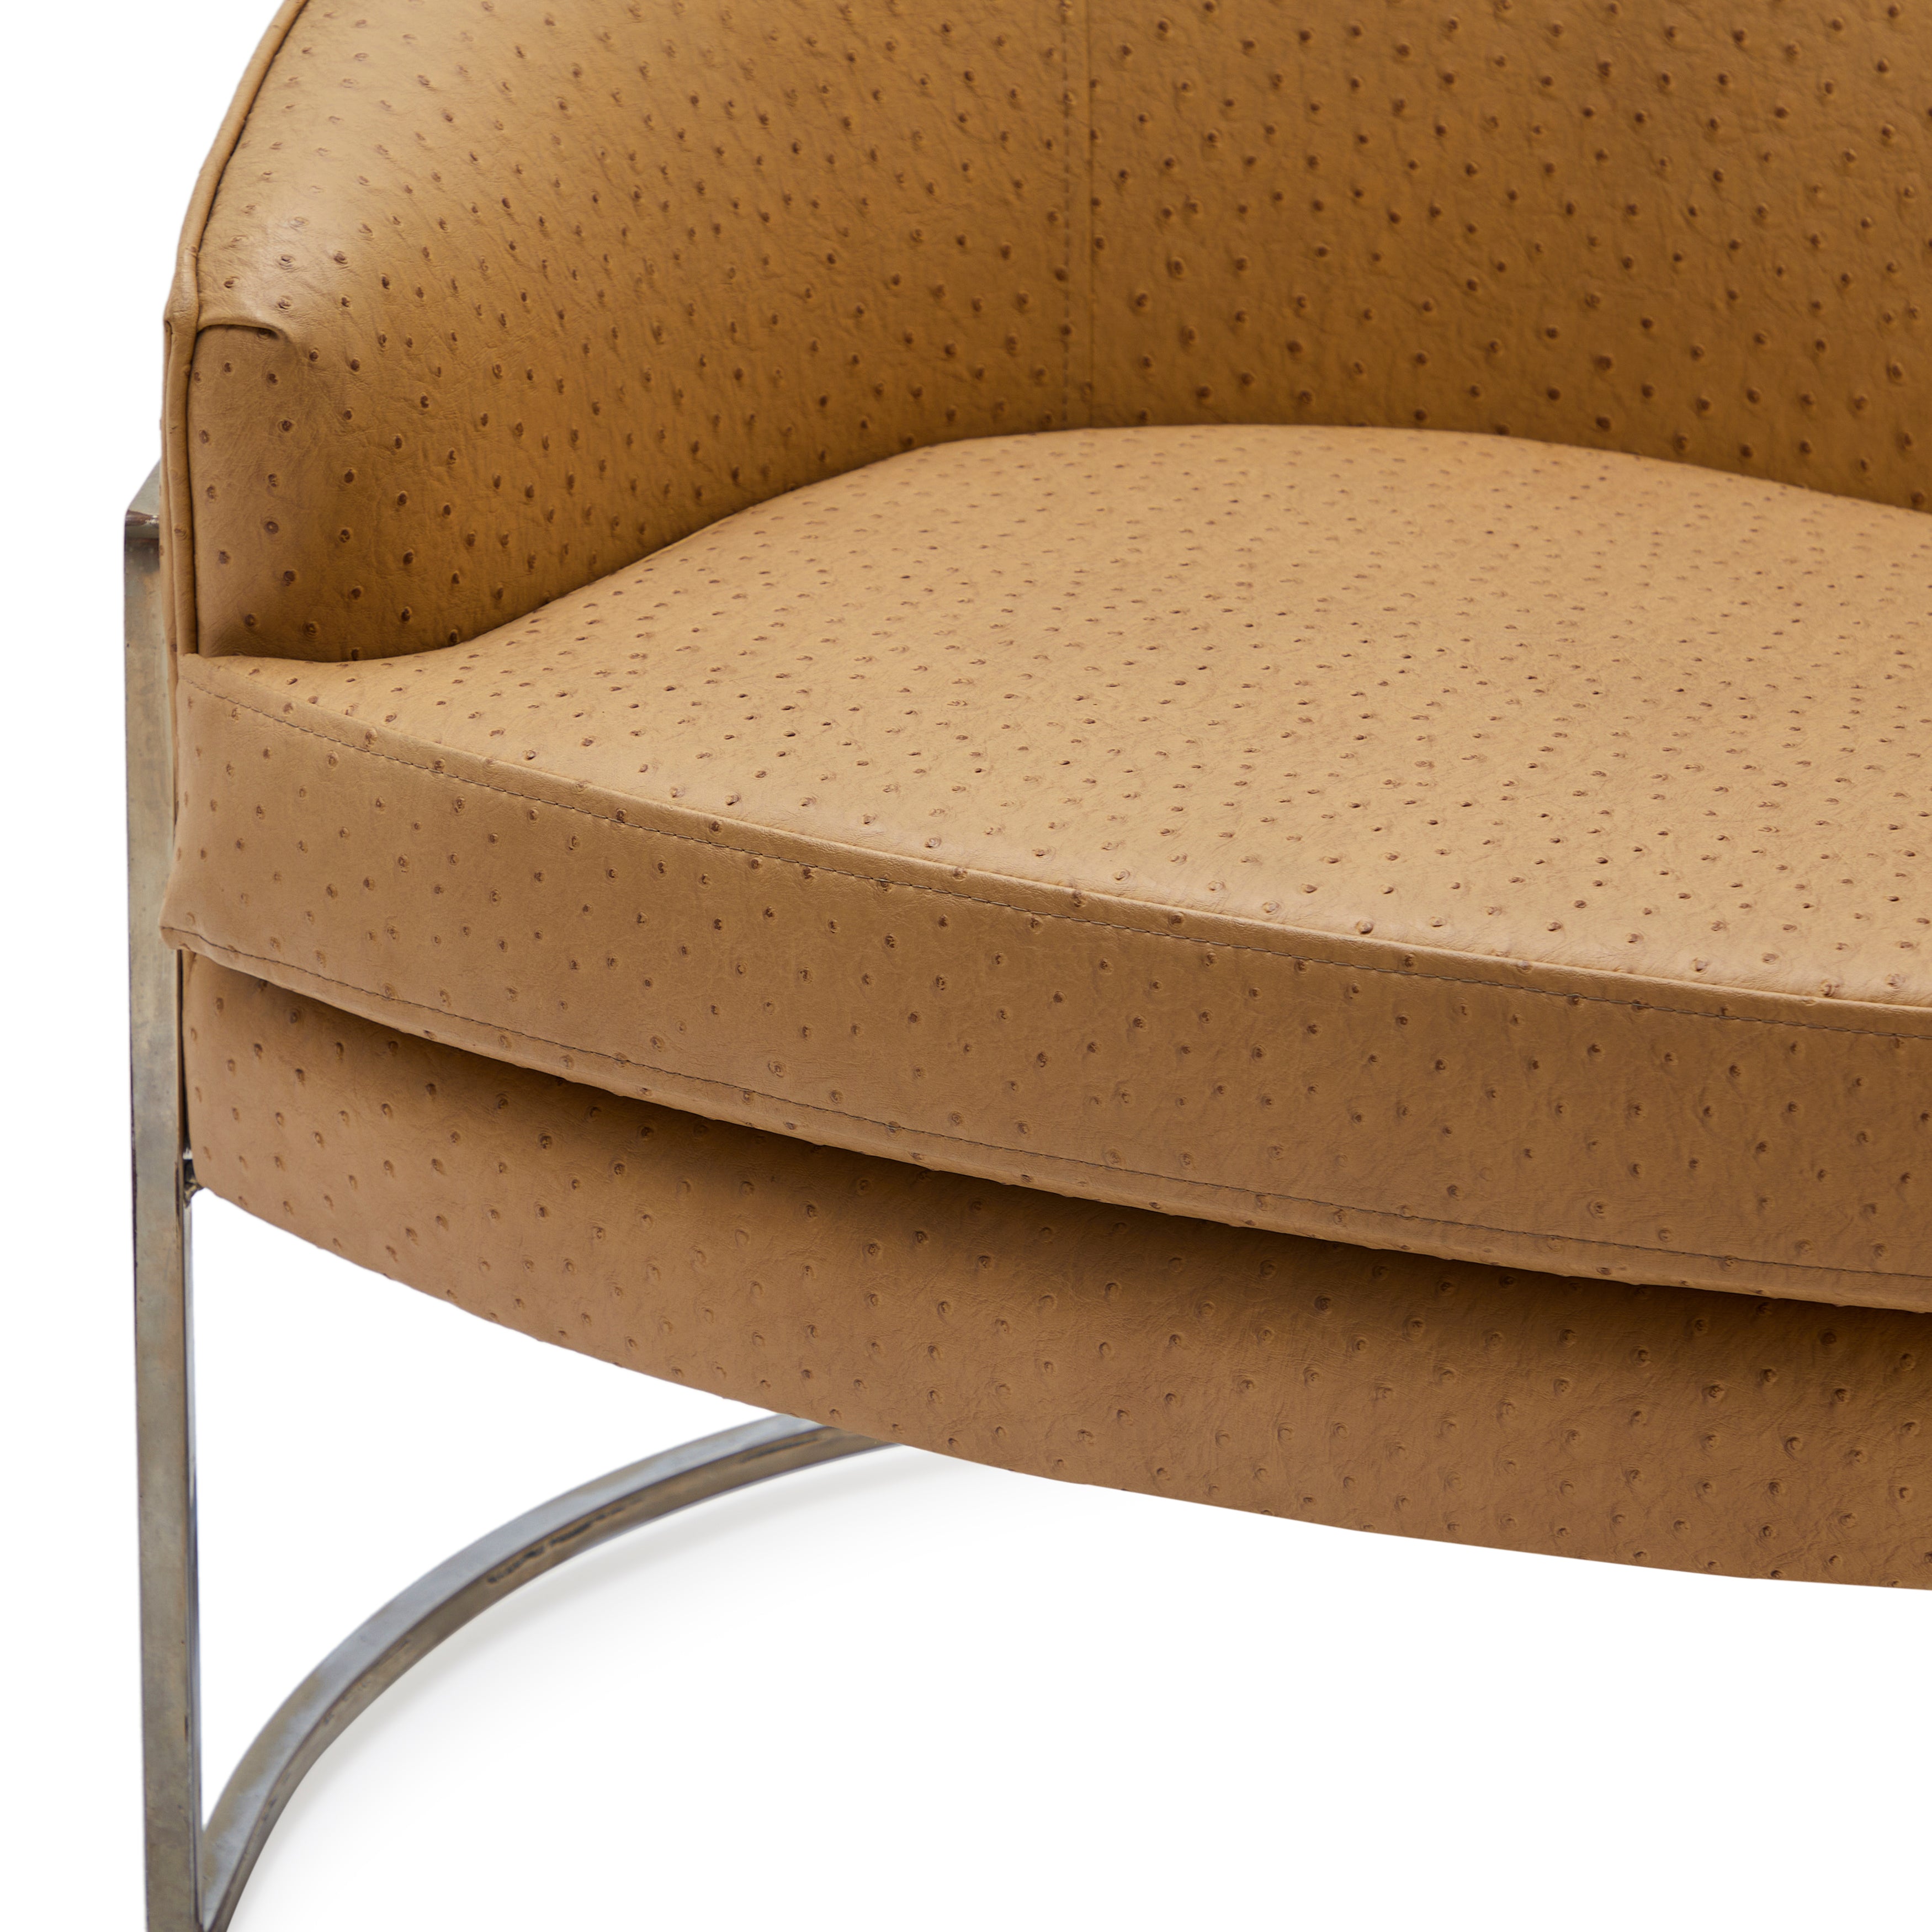 Tan Ostrich Leather Rounded Lounge Chair - Gil & Roy Props